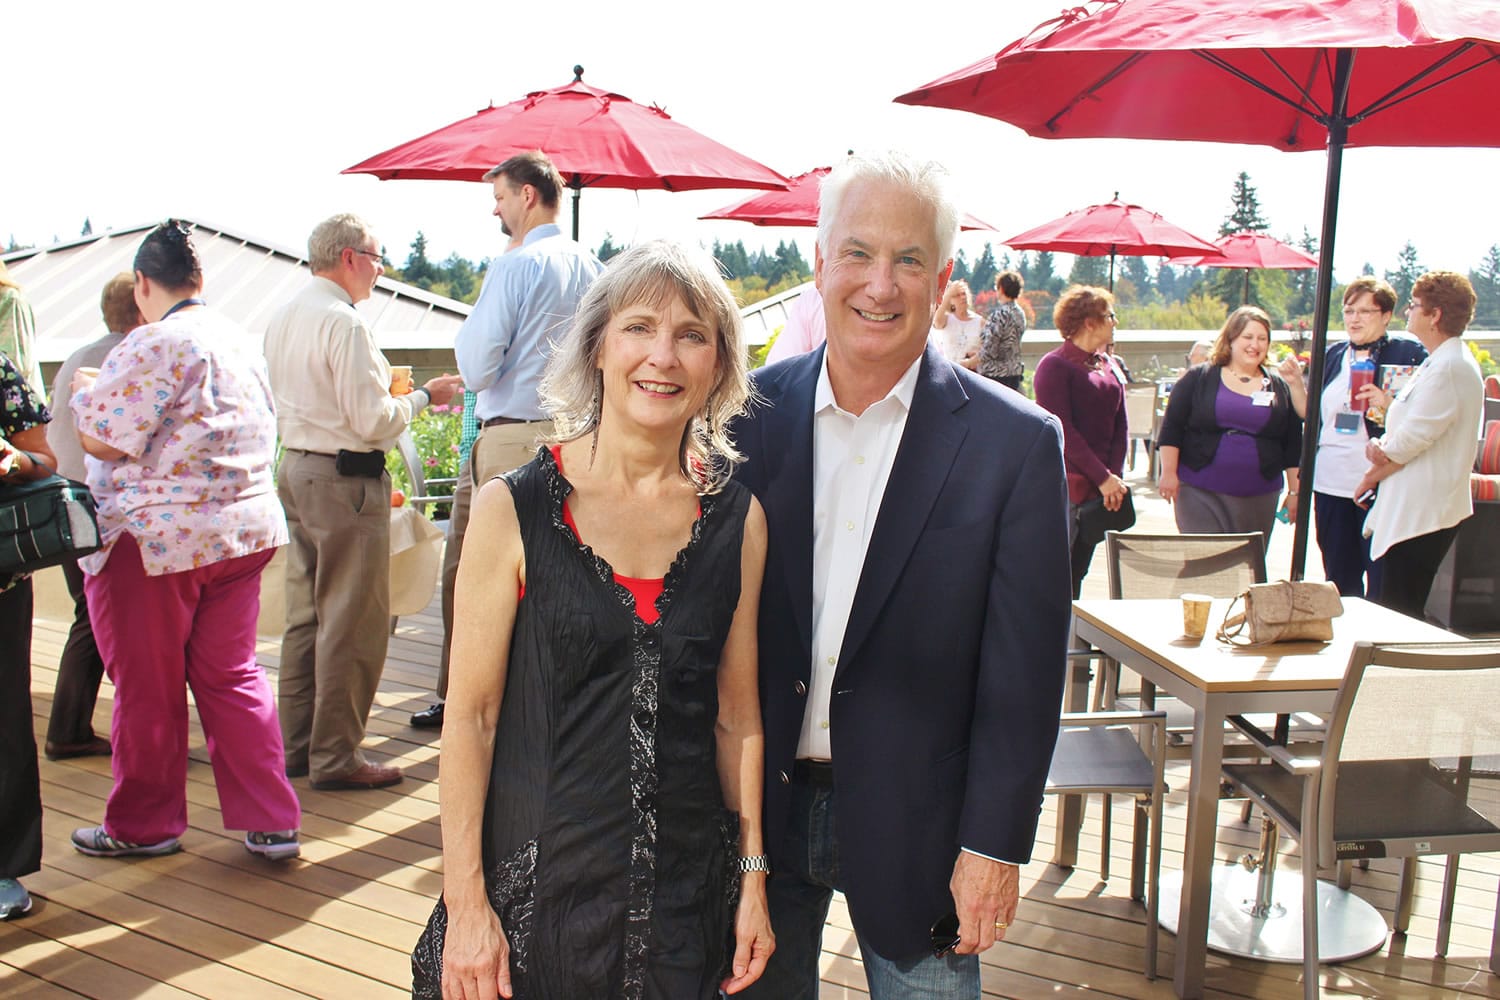 North Garrison Heights: Robin and Joseph Kortum at the re-dedication ceremony for the Sarah Kortum Caregiver Garden, which they donated $100,000 to name it in honor of Joe?s mother.